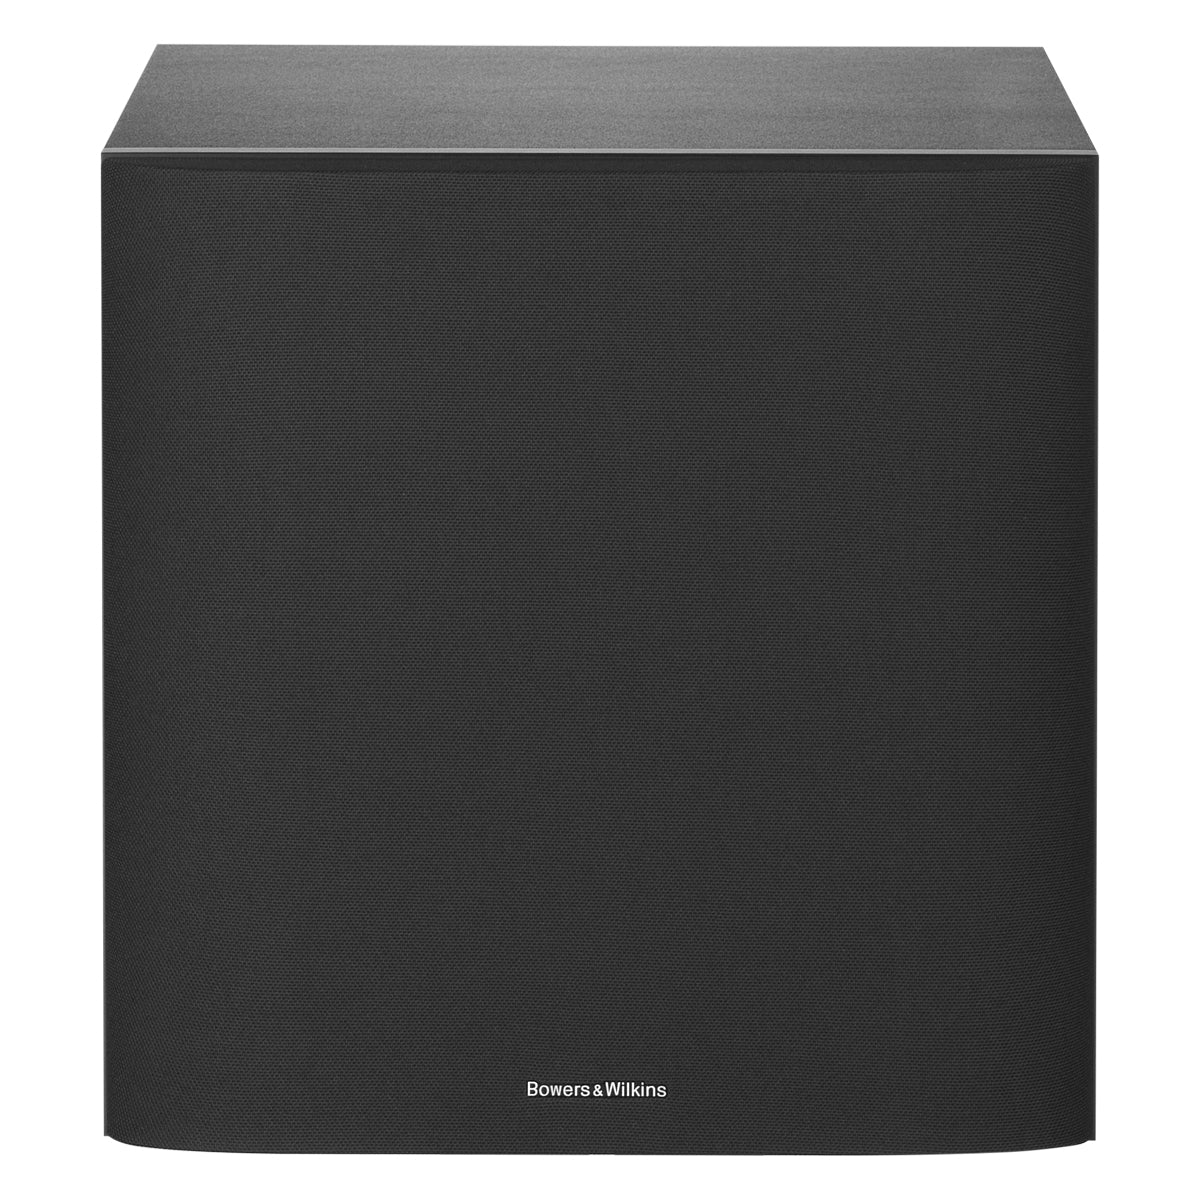 Bowers & Wilkins ASW610XP 10" 500W Subwoofer - Black - The Audio Experts